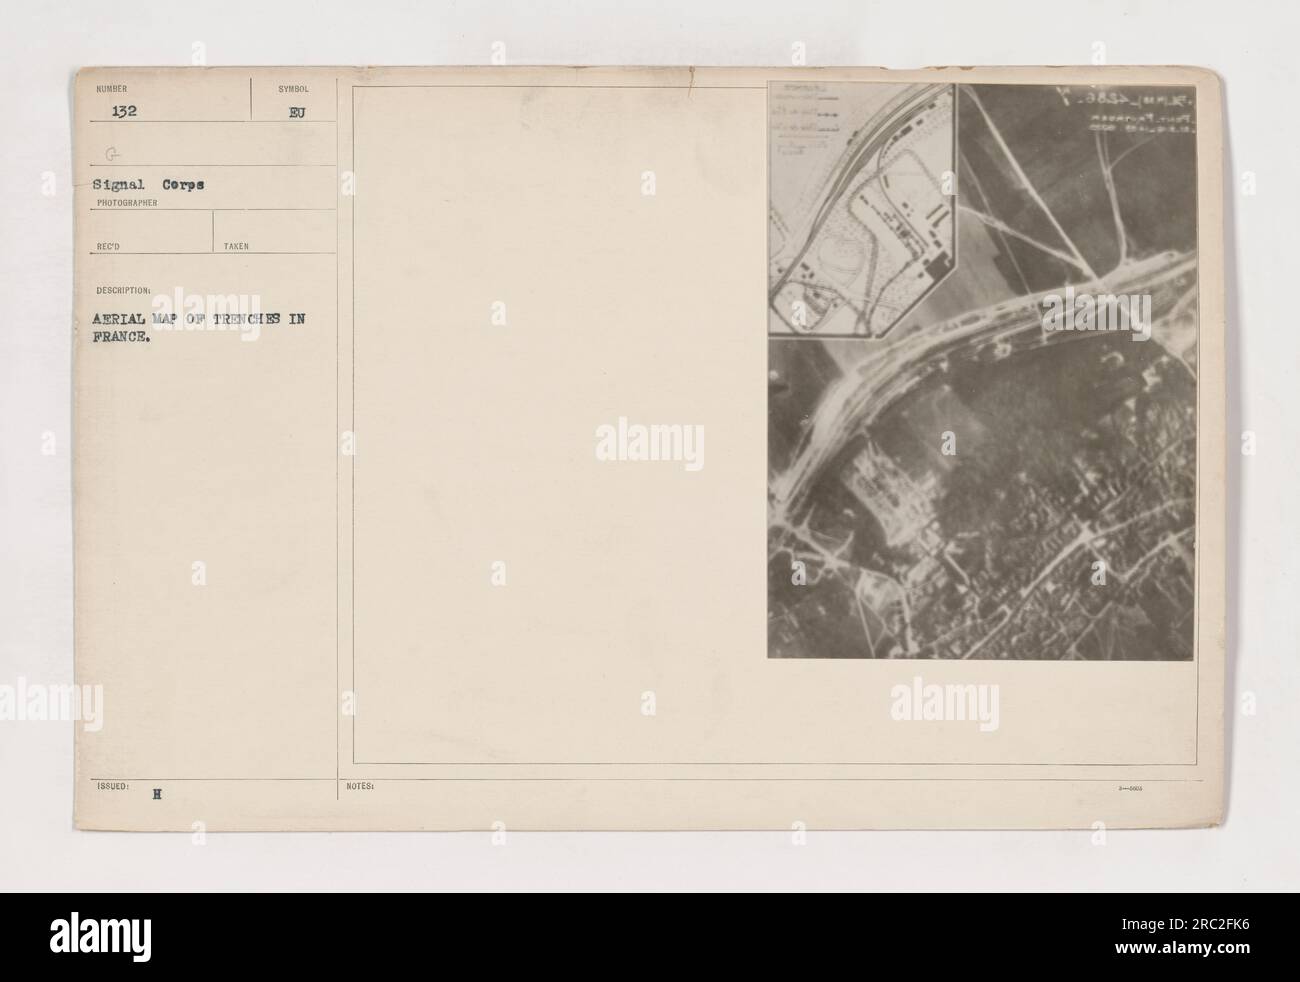 This photograph, labeled as 111-SC-132, shows an aerial map of trenches in France, specifically in Pont Faverger. It is a part of the Signal Corps collection and was taken by a photographer. The description mentions that it was taken during World War I and is an issued photograph. The symbol 'BU' is not further clarified. Stock Photo